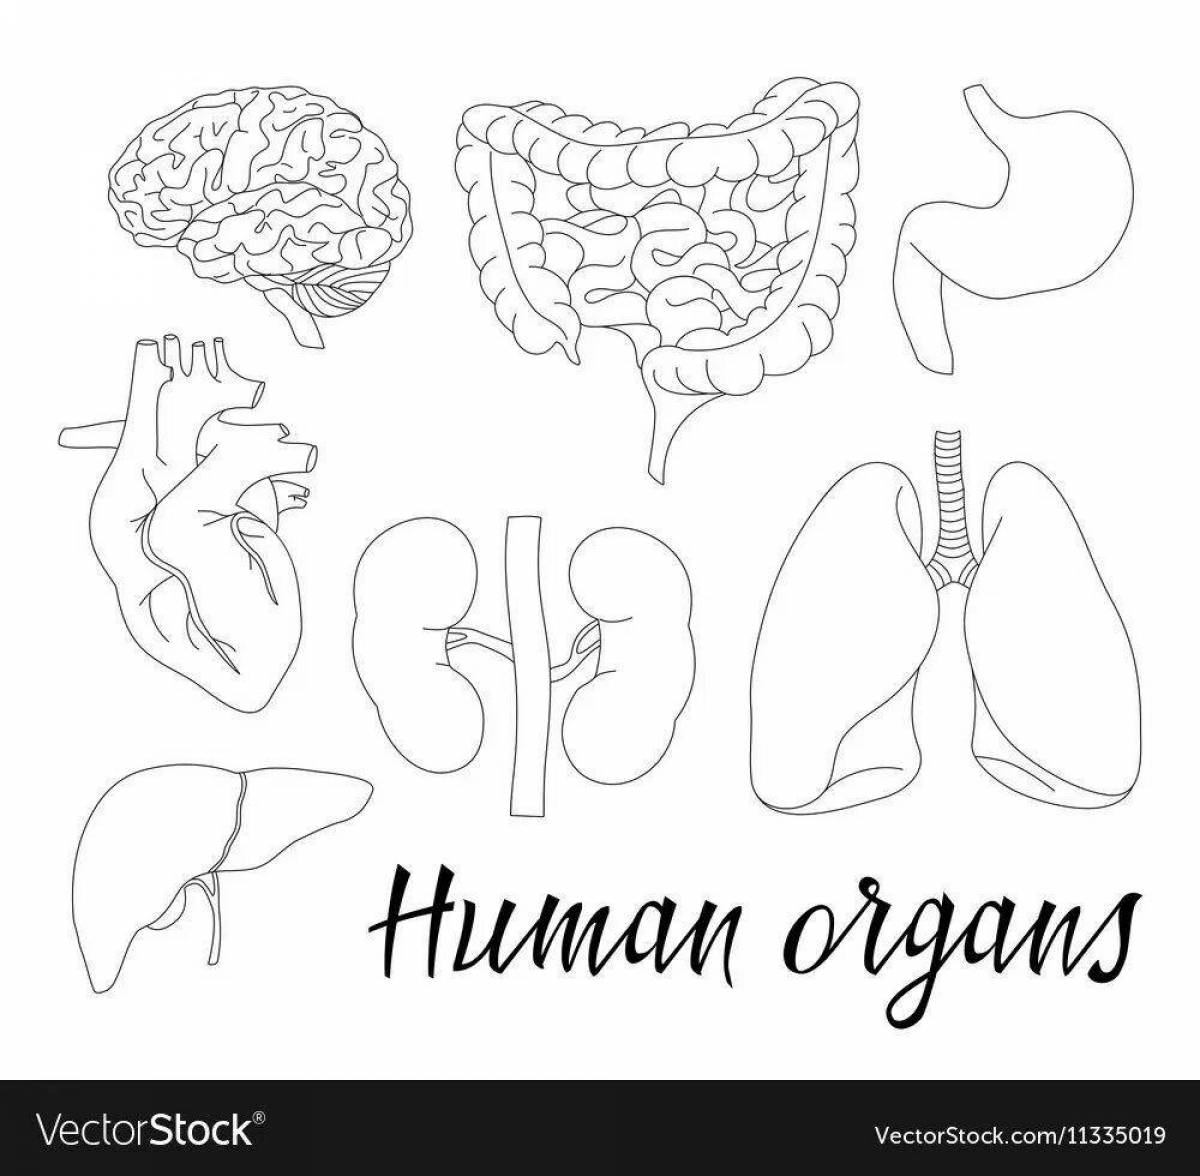 Attractive coloring of the human body with internal organs